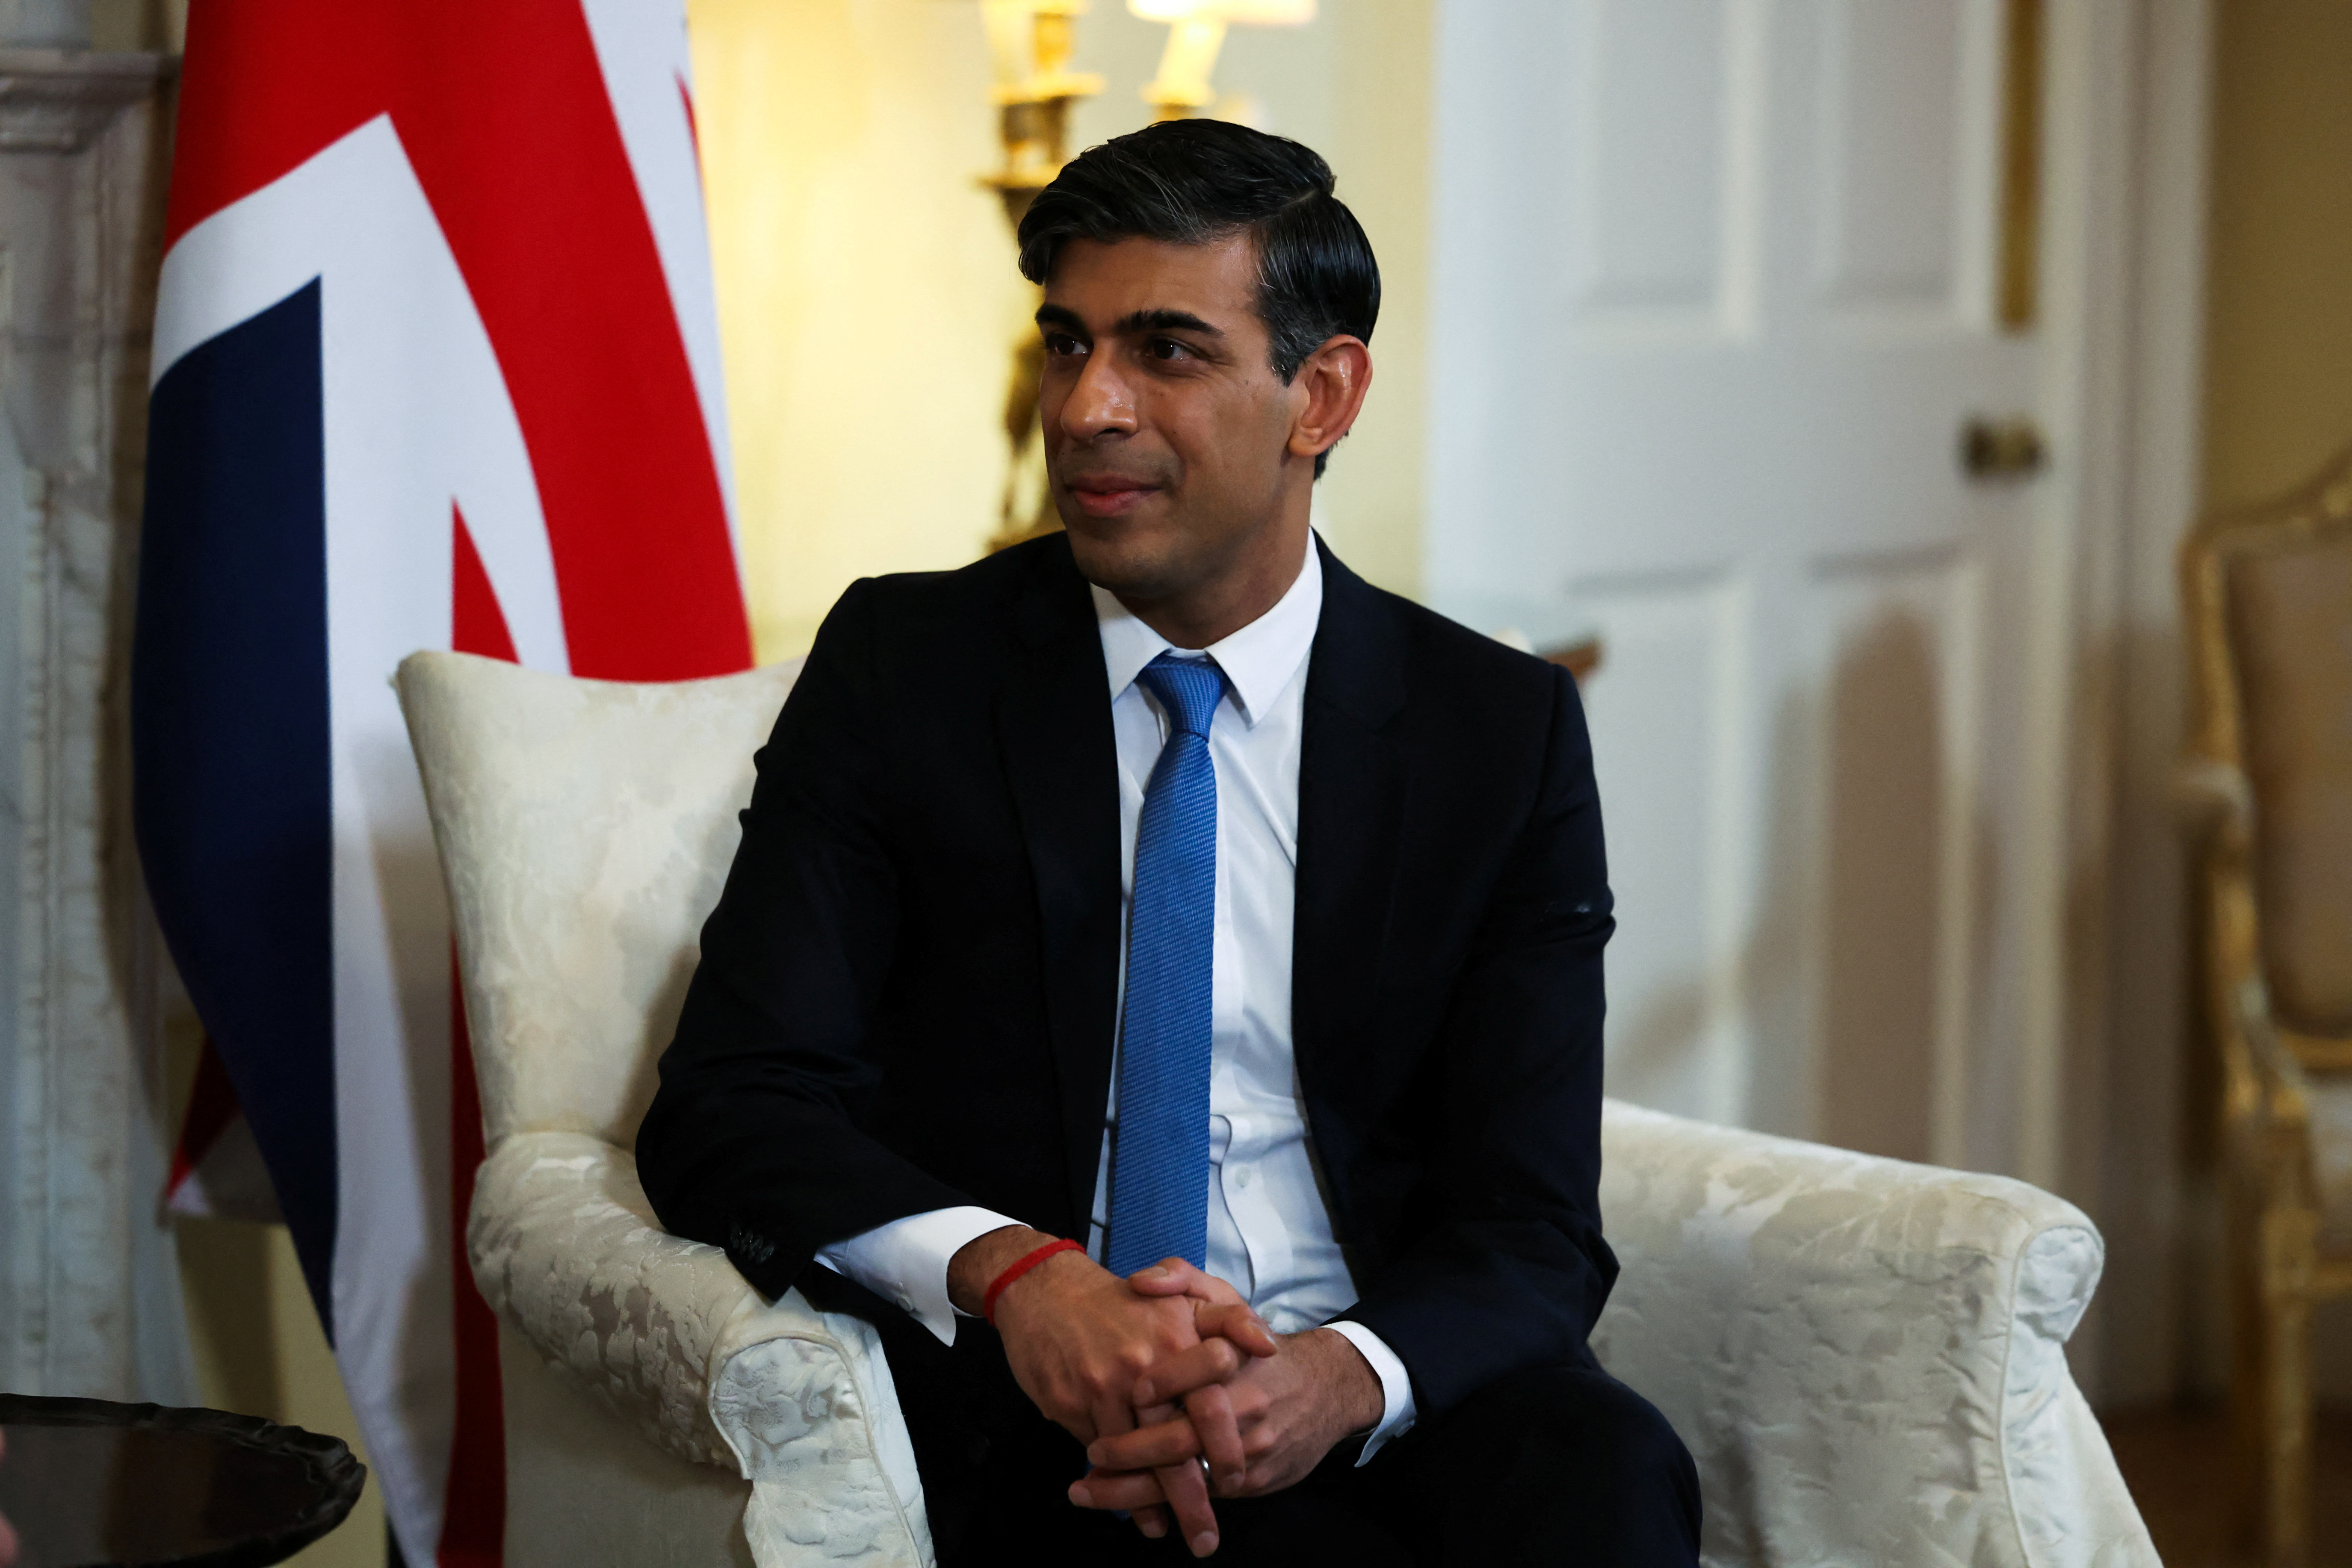 The figures deal a blow to Prime Minister Rishi Sunak, who has promised to grow the economy as one of his five priorities. Photo by Hannah McKay - WPA Pool/Getty Images